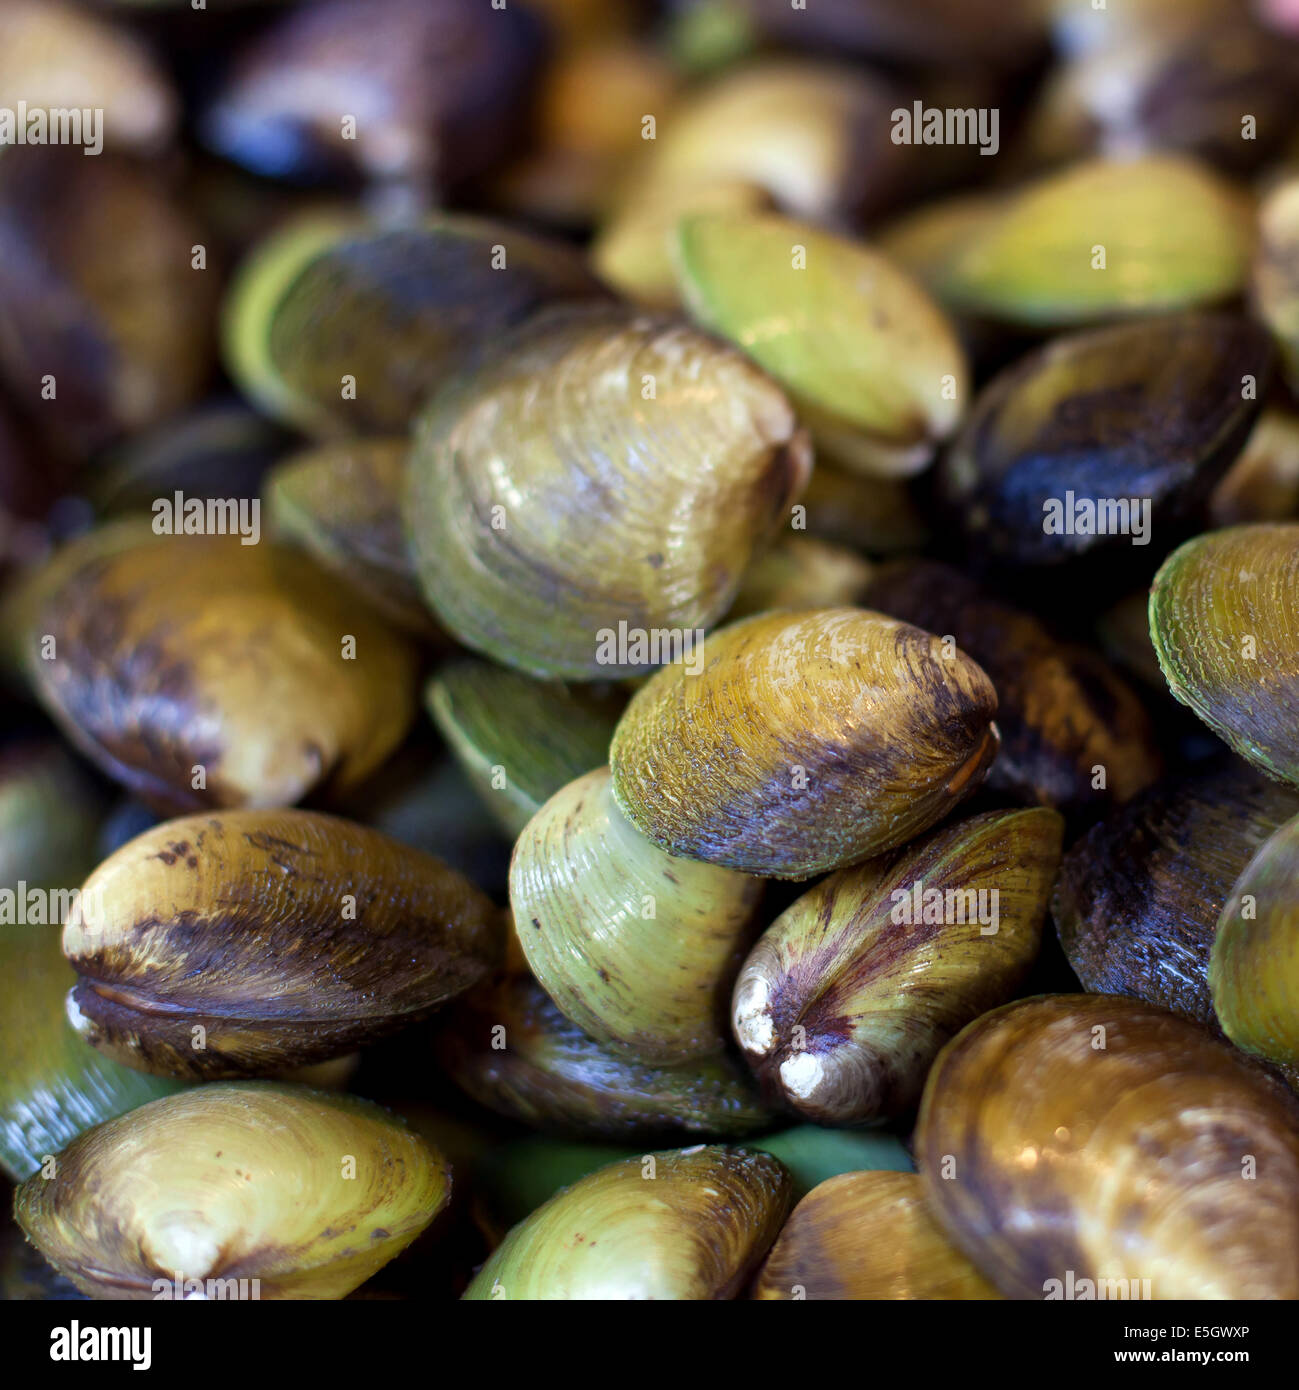 Oysters, mussels and scallops on asian market Stock Photo